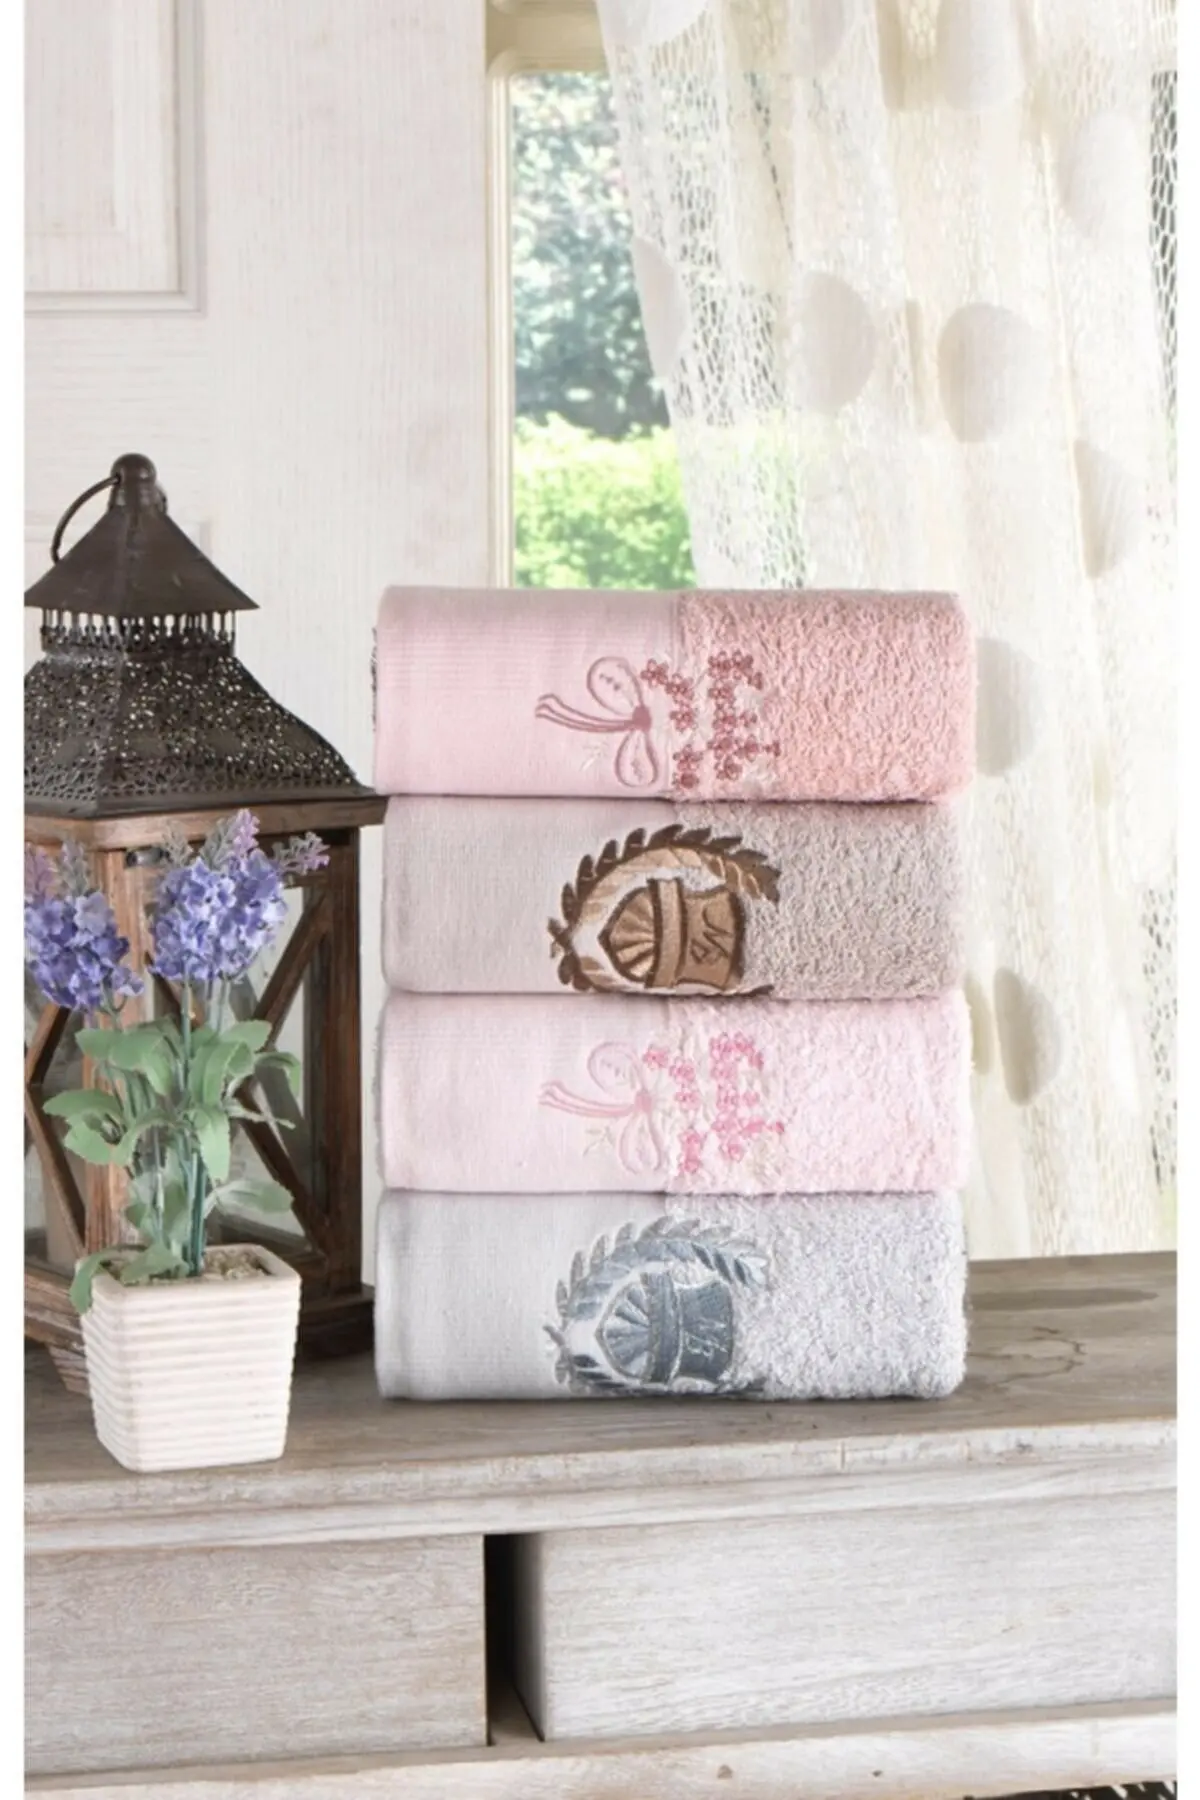 WONDERFULSOFTTextile 100% Cottonlife Set of 4 Hand And Face Towels Embroidered 50x85 CM